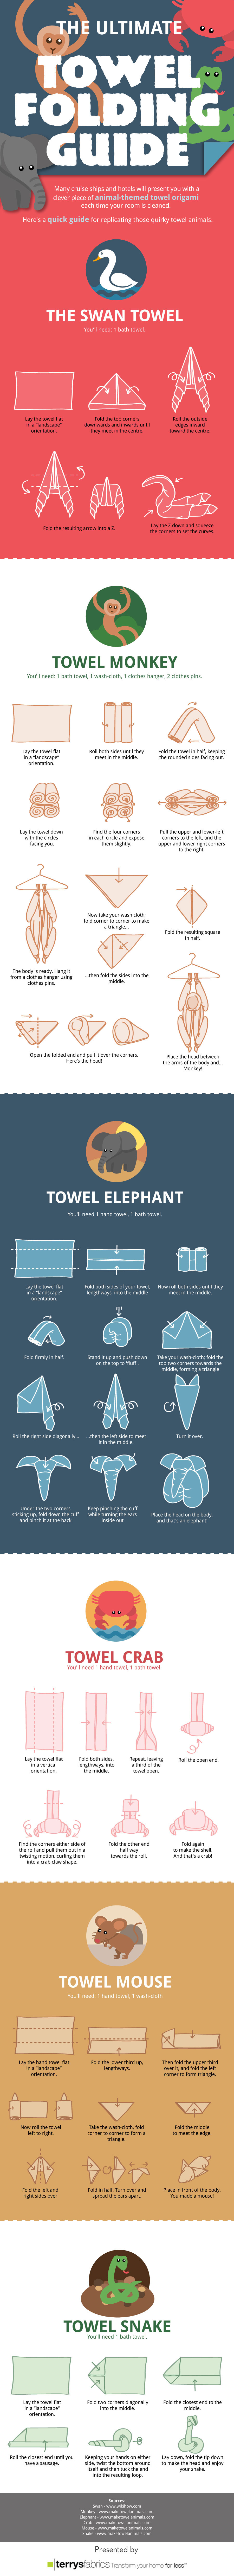 the-ultimate-towel-folding-guide